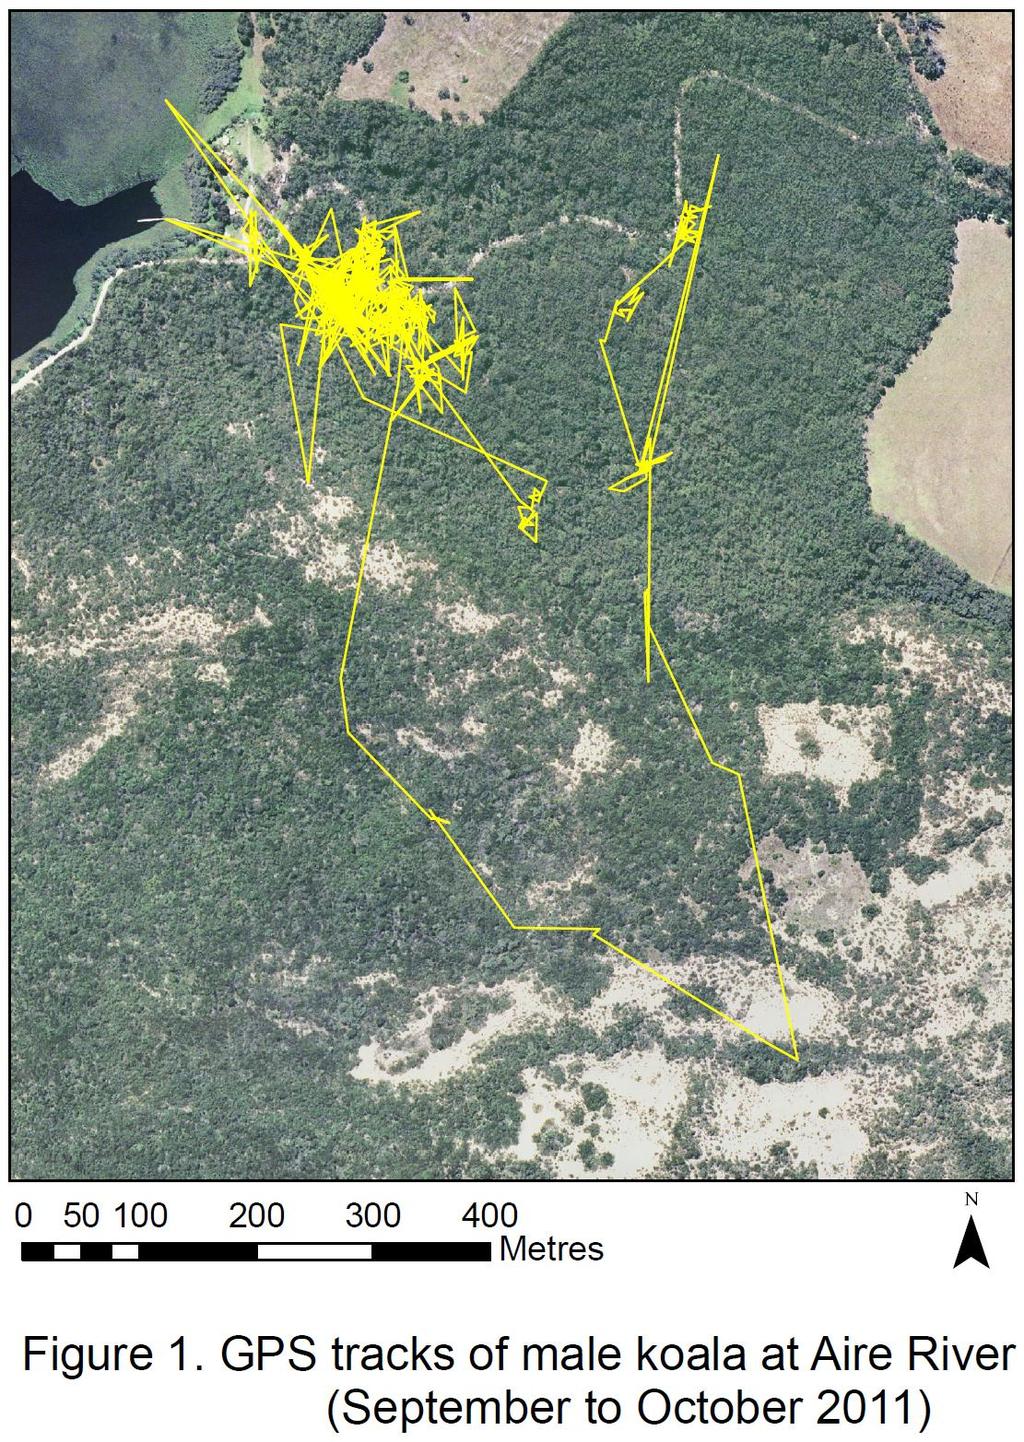 Figure 1: GPS tracks of male koala at Aire River (September to October 2011). Tri-axial accelerometer dataloggers were deployed on 15 koalas in October.